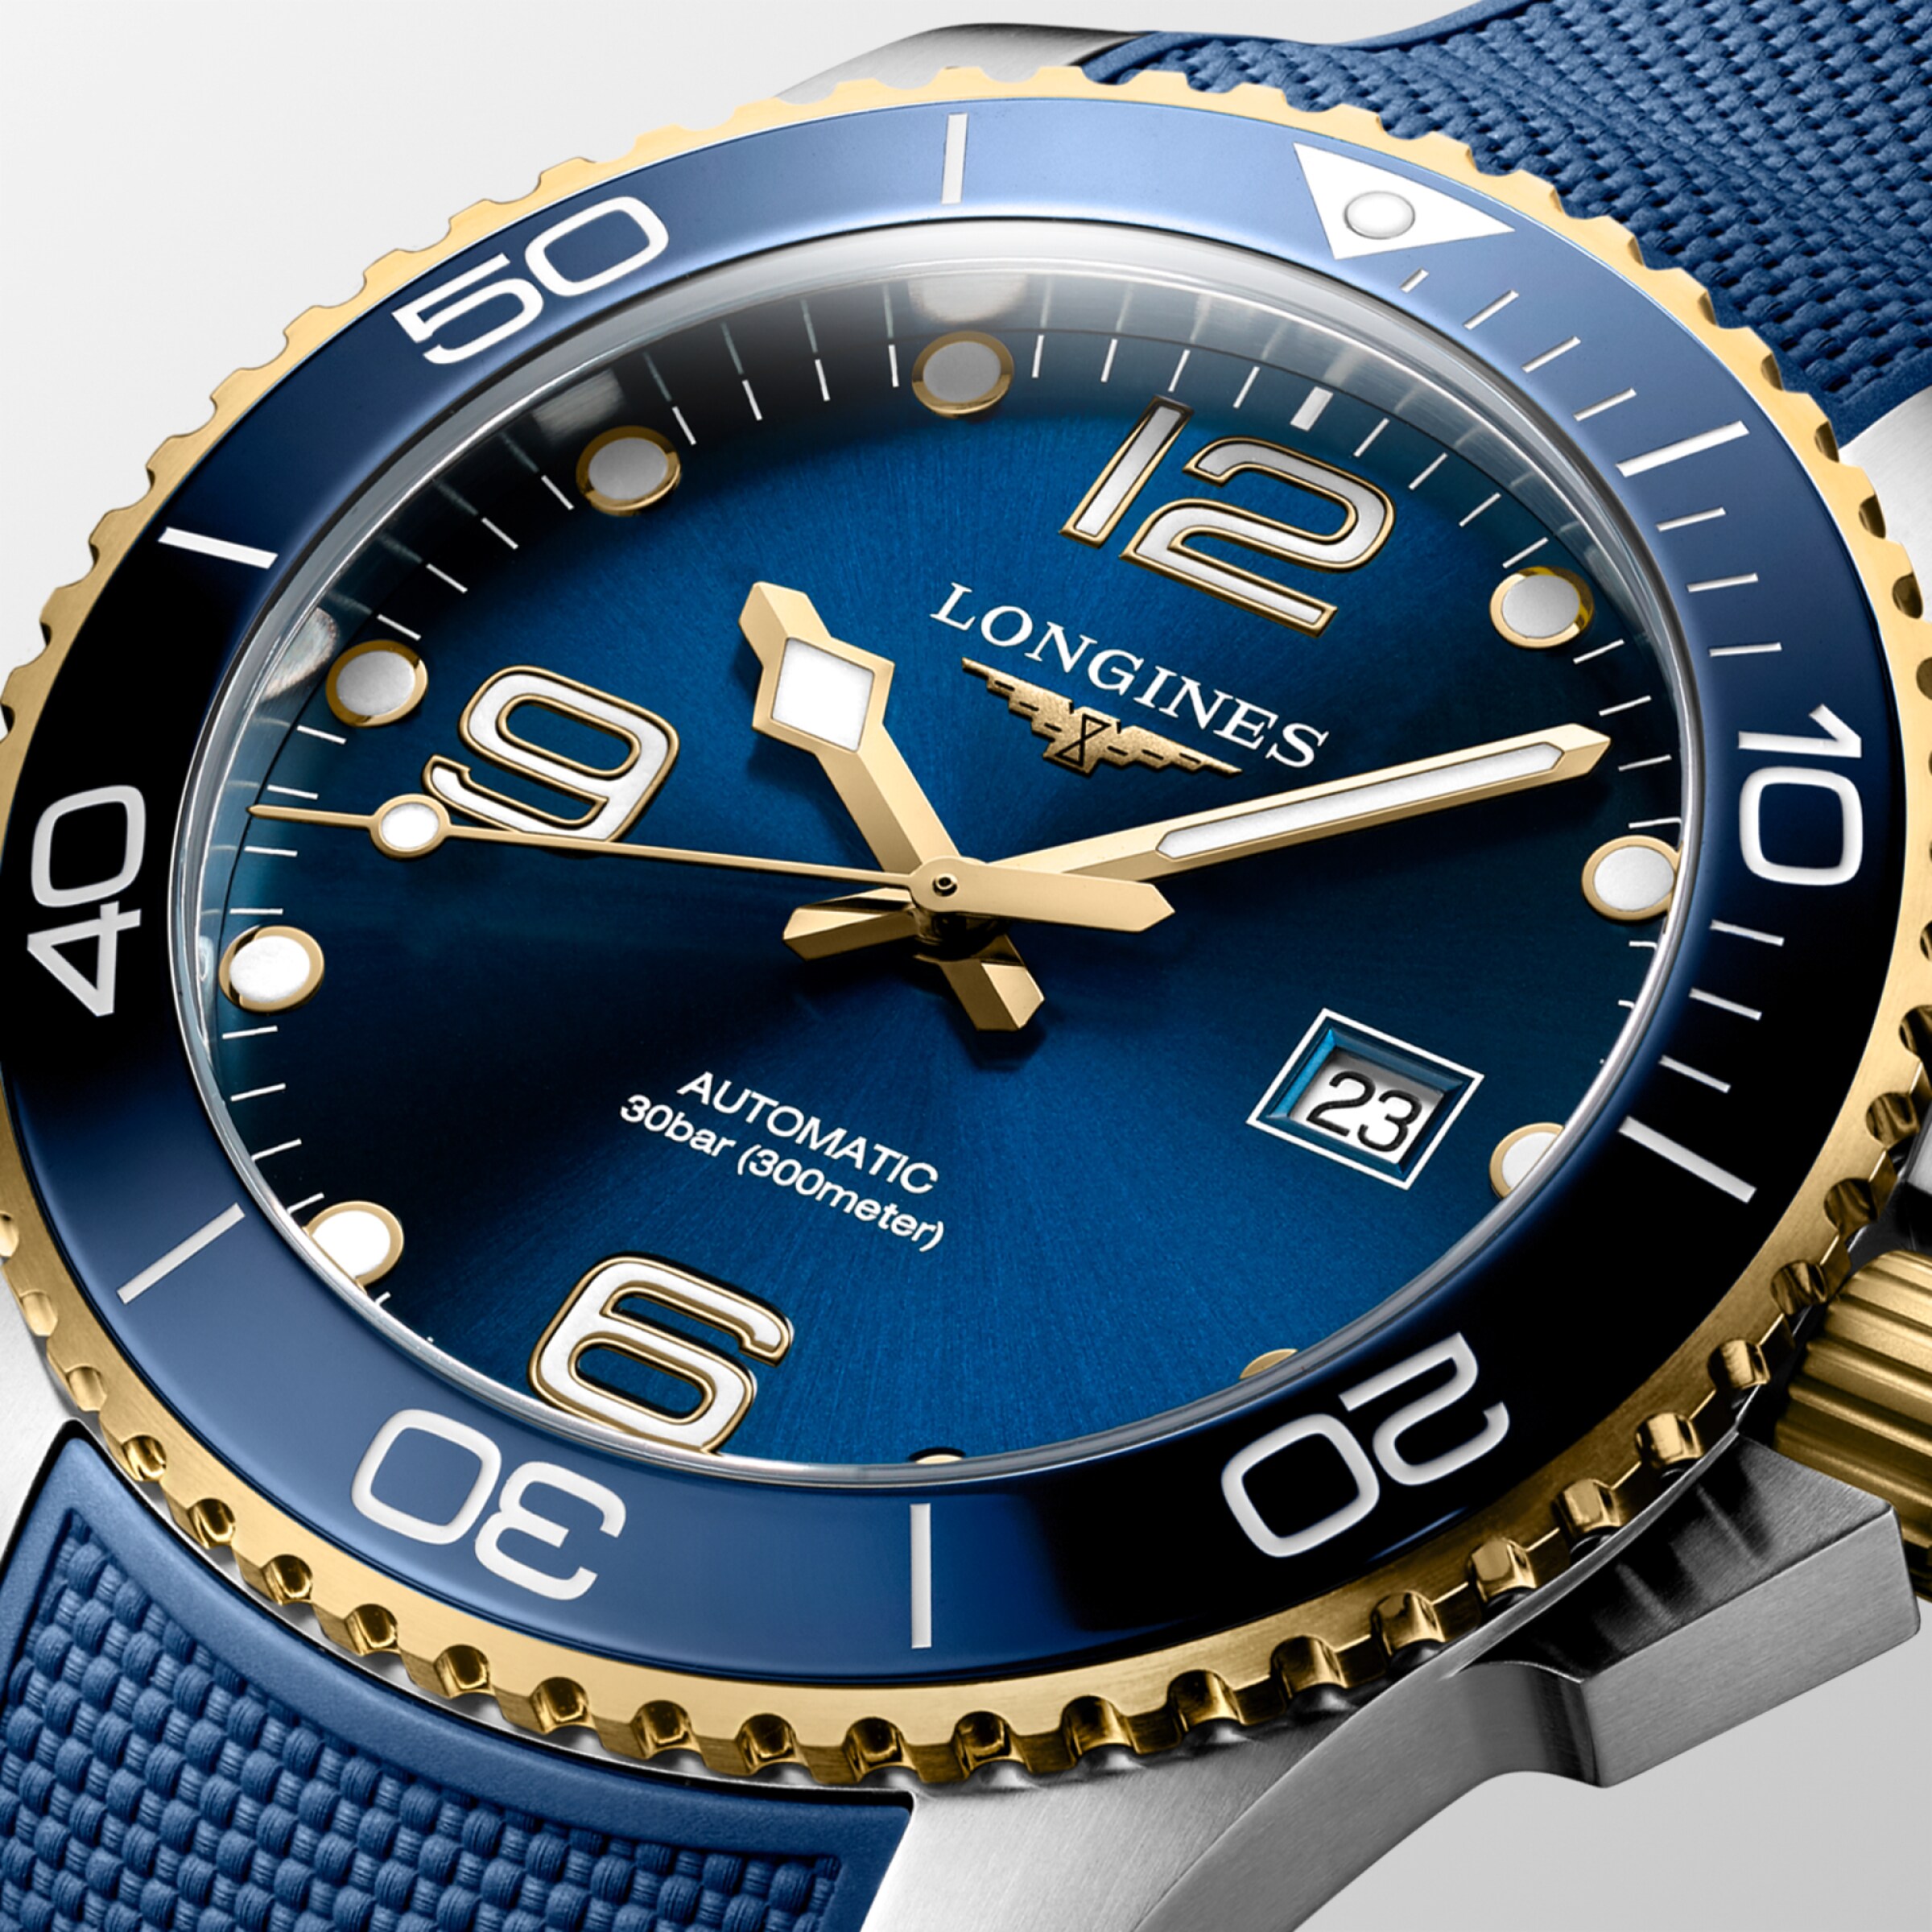 Longines HYDROCONQUEST Automatic Stainless steel and ceramic bezel Watch - L3.782.3.96.9